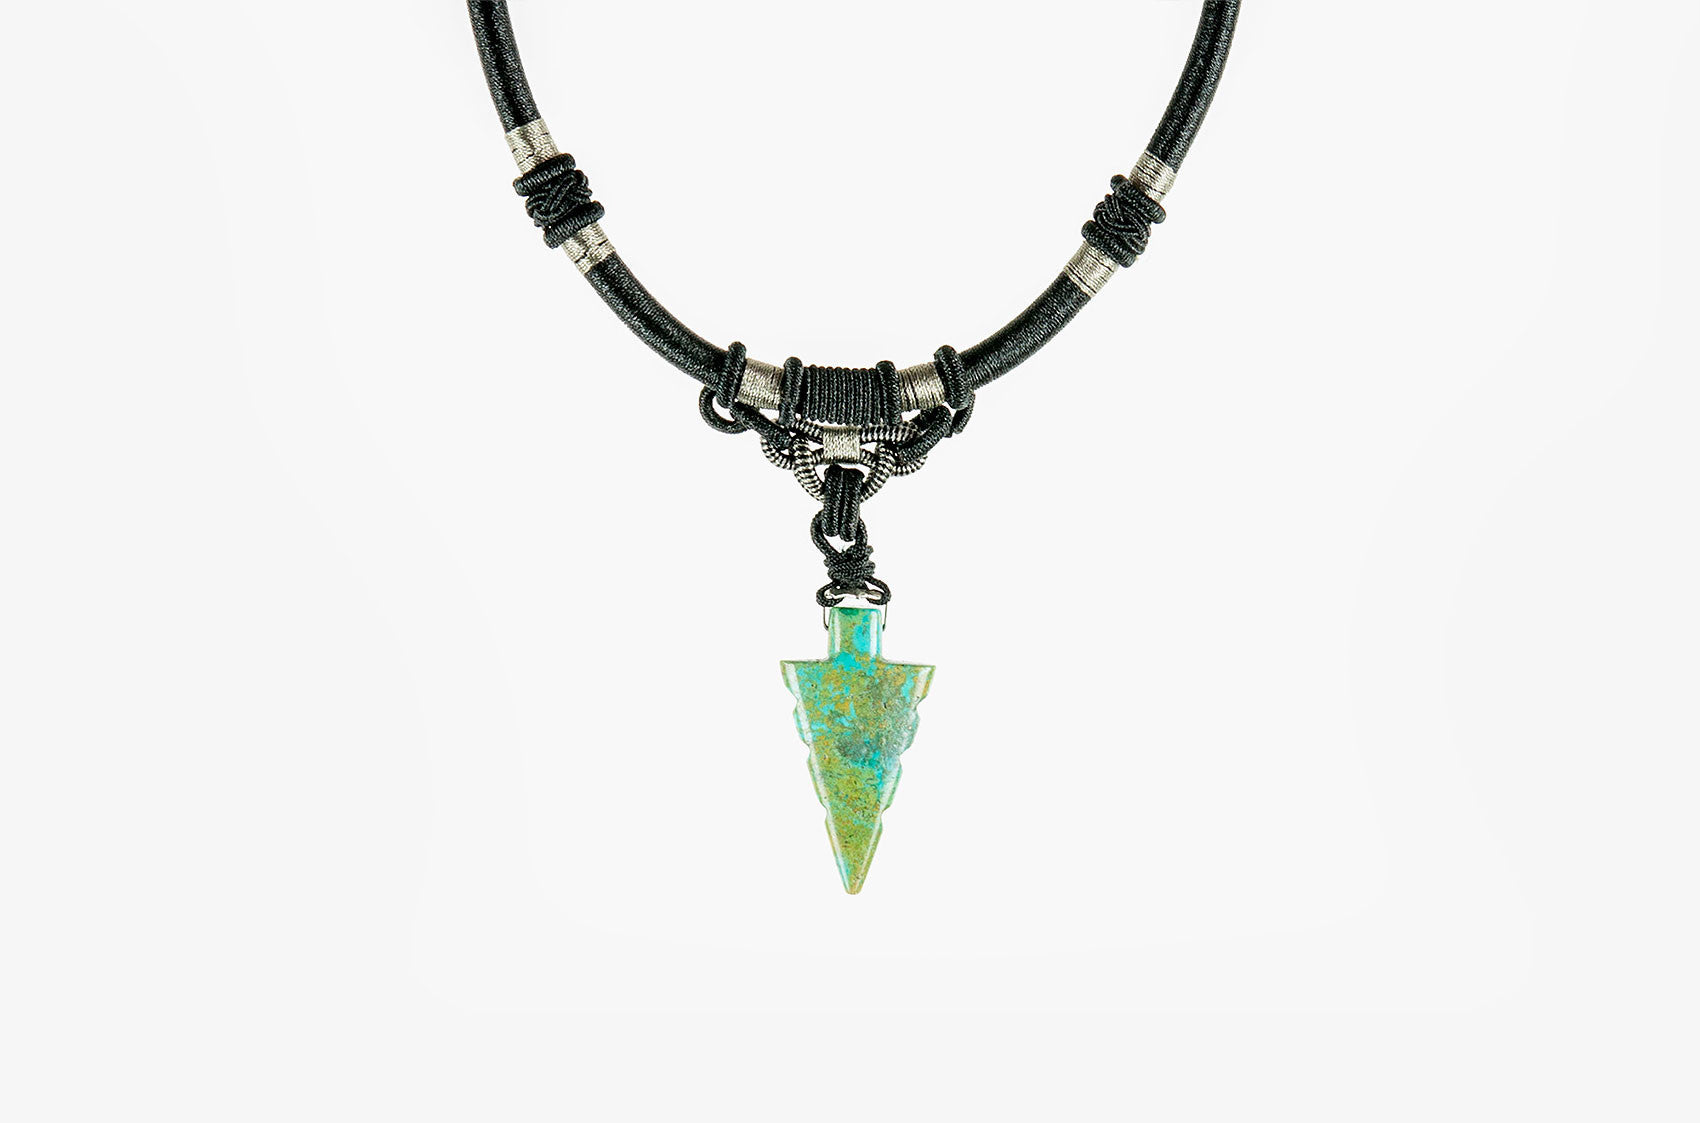 Tribal woven necklace with jade arrow pendant